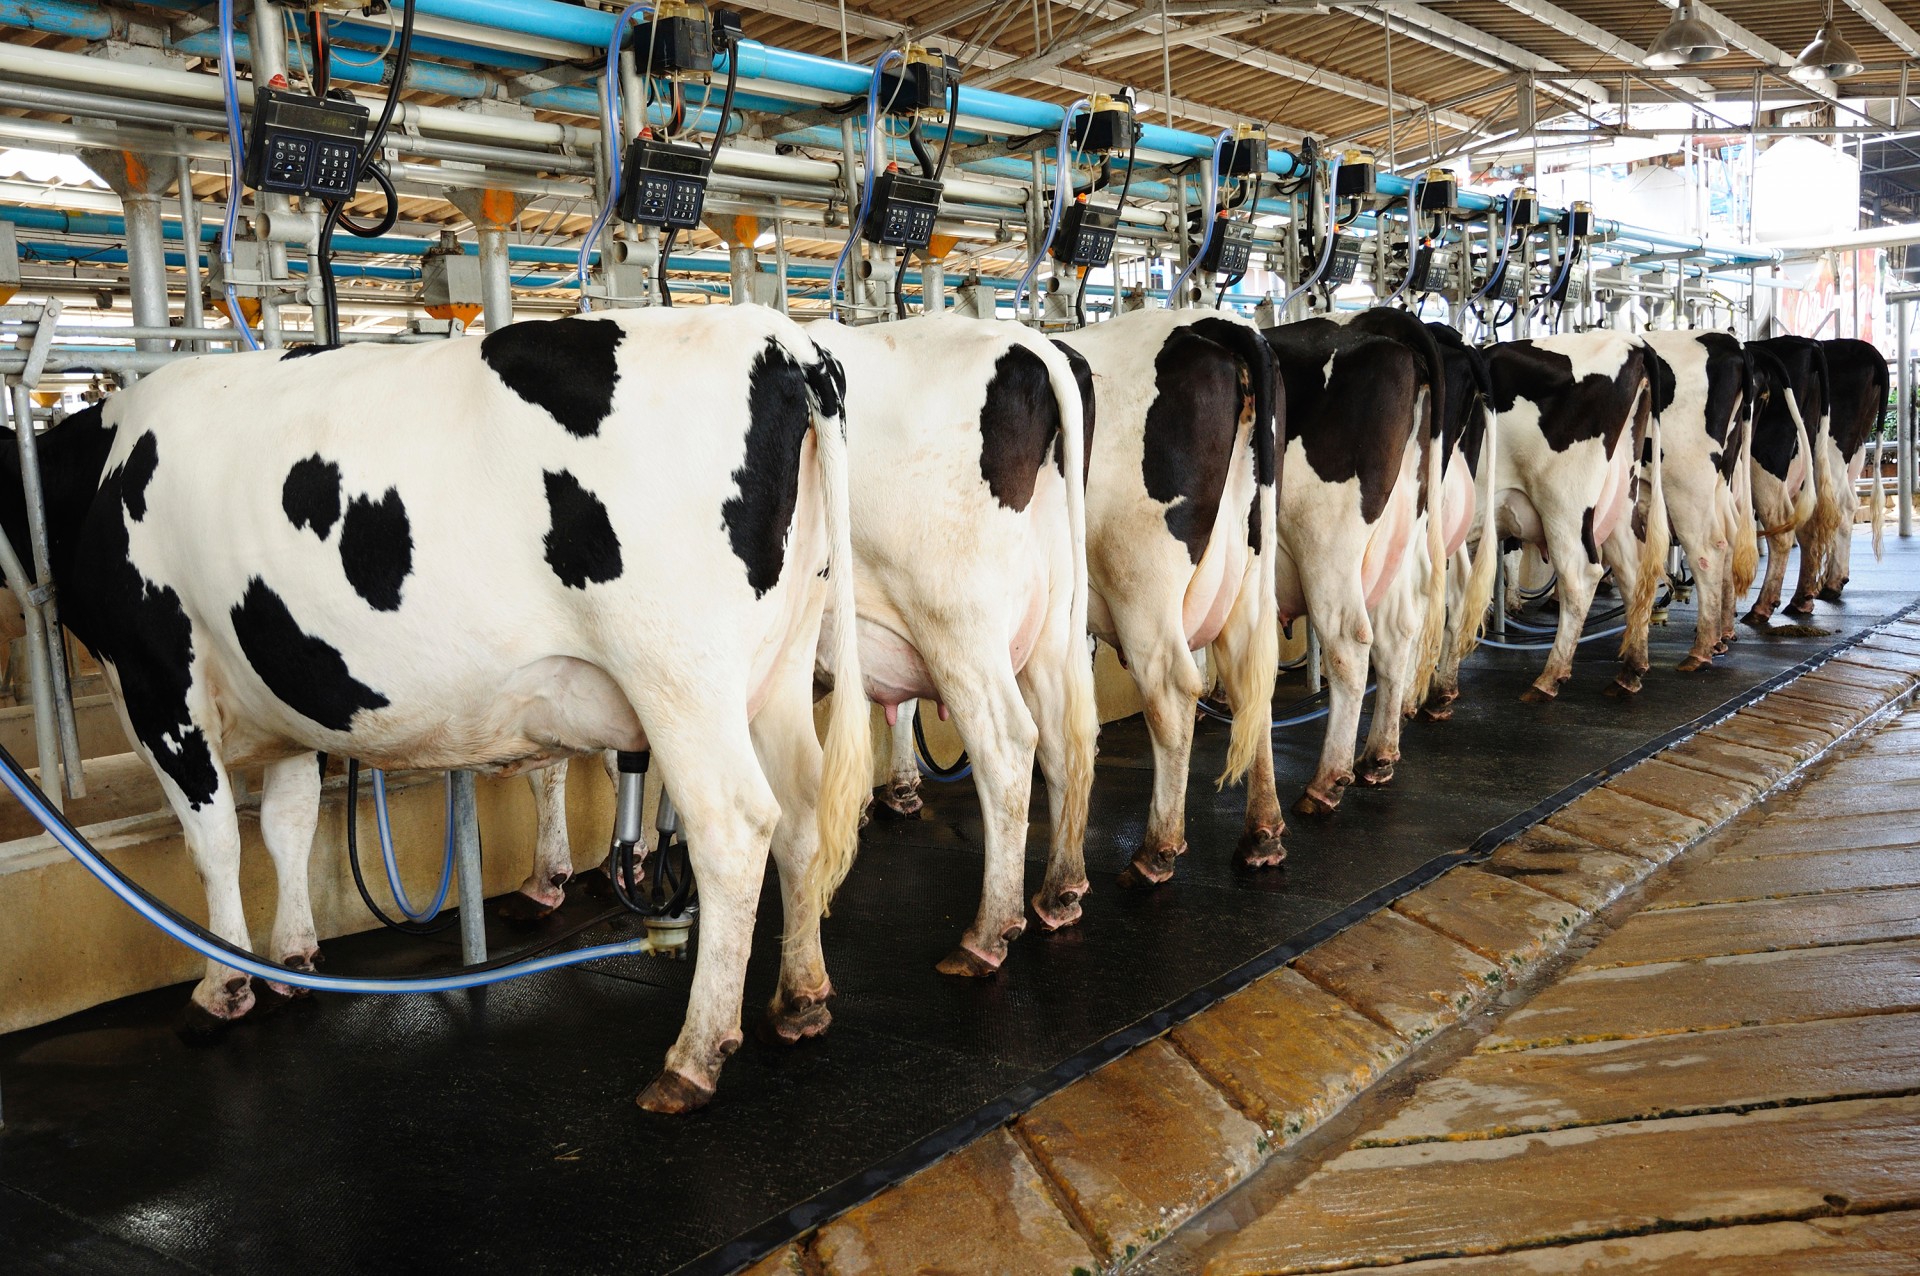 FDA tests have turned up residues suggesting a few dairy farmers are illegally using antibiotics. Photo: iStockphoto